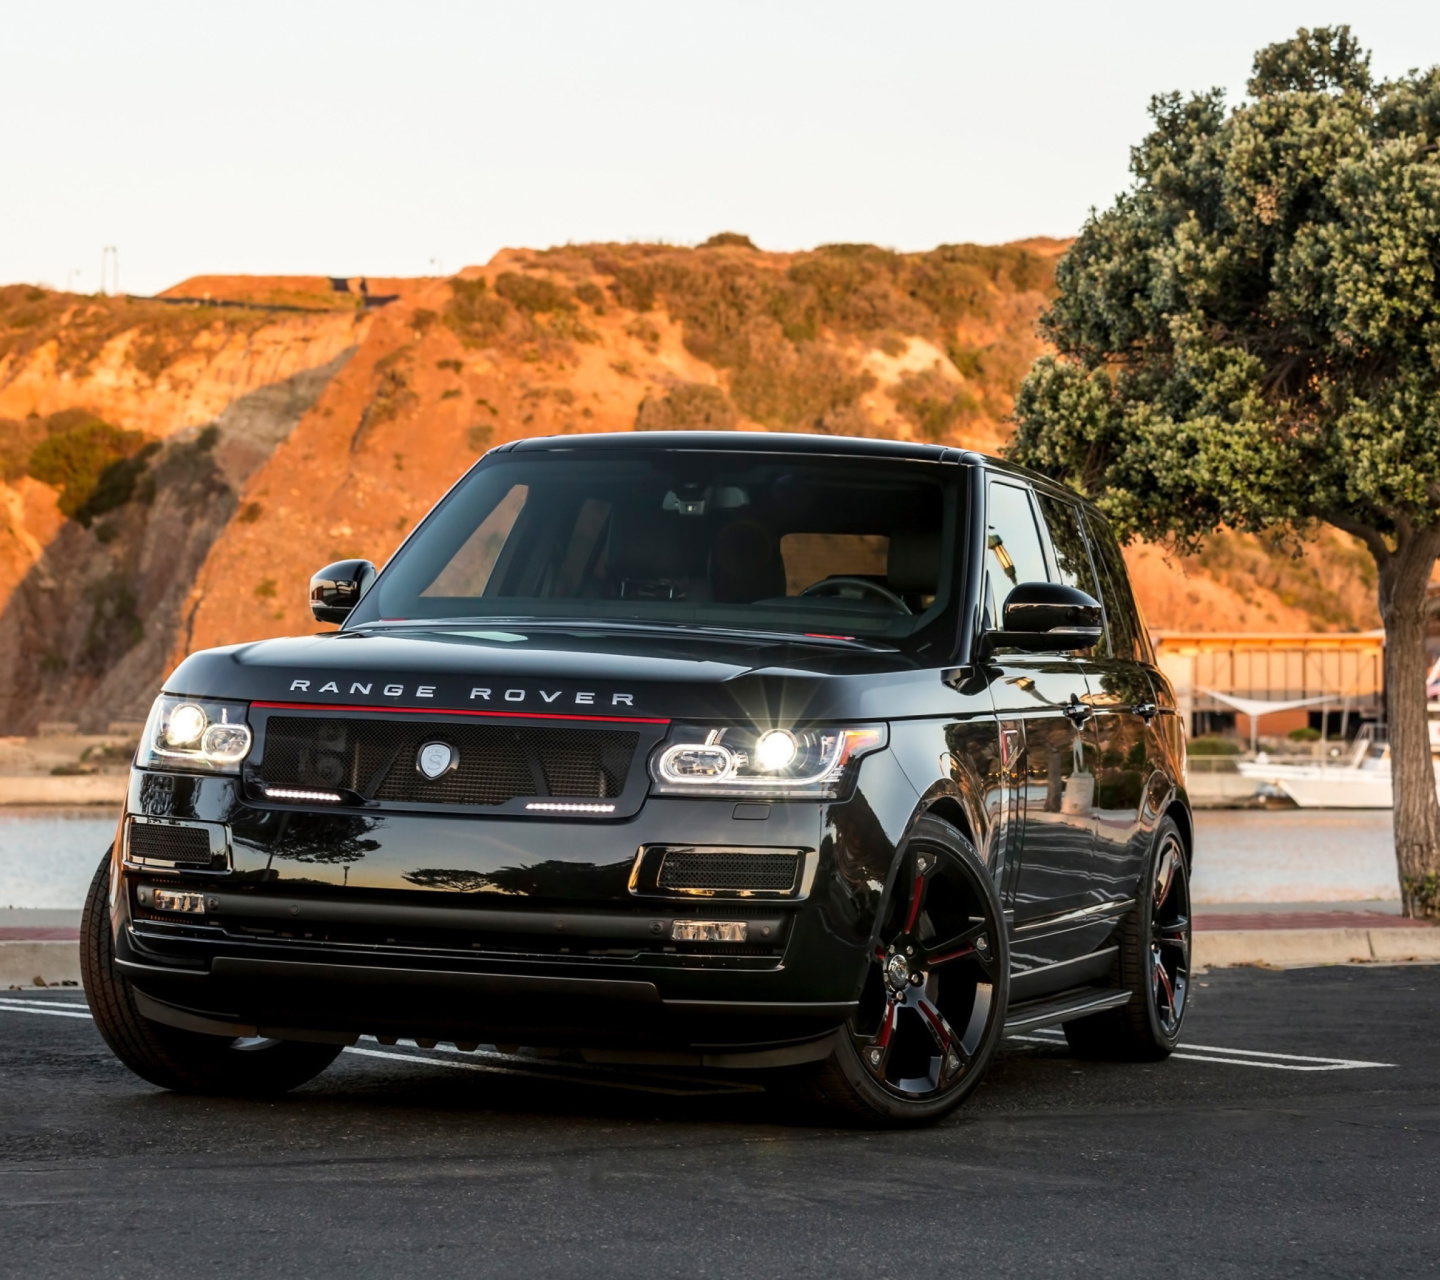 Range Rover STRUT with Grille Package wallpaper 1440x1280